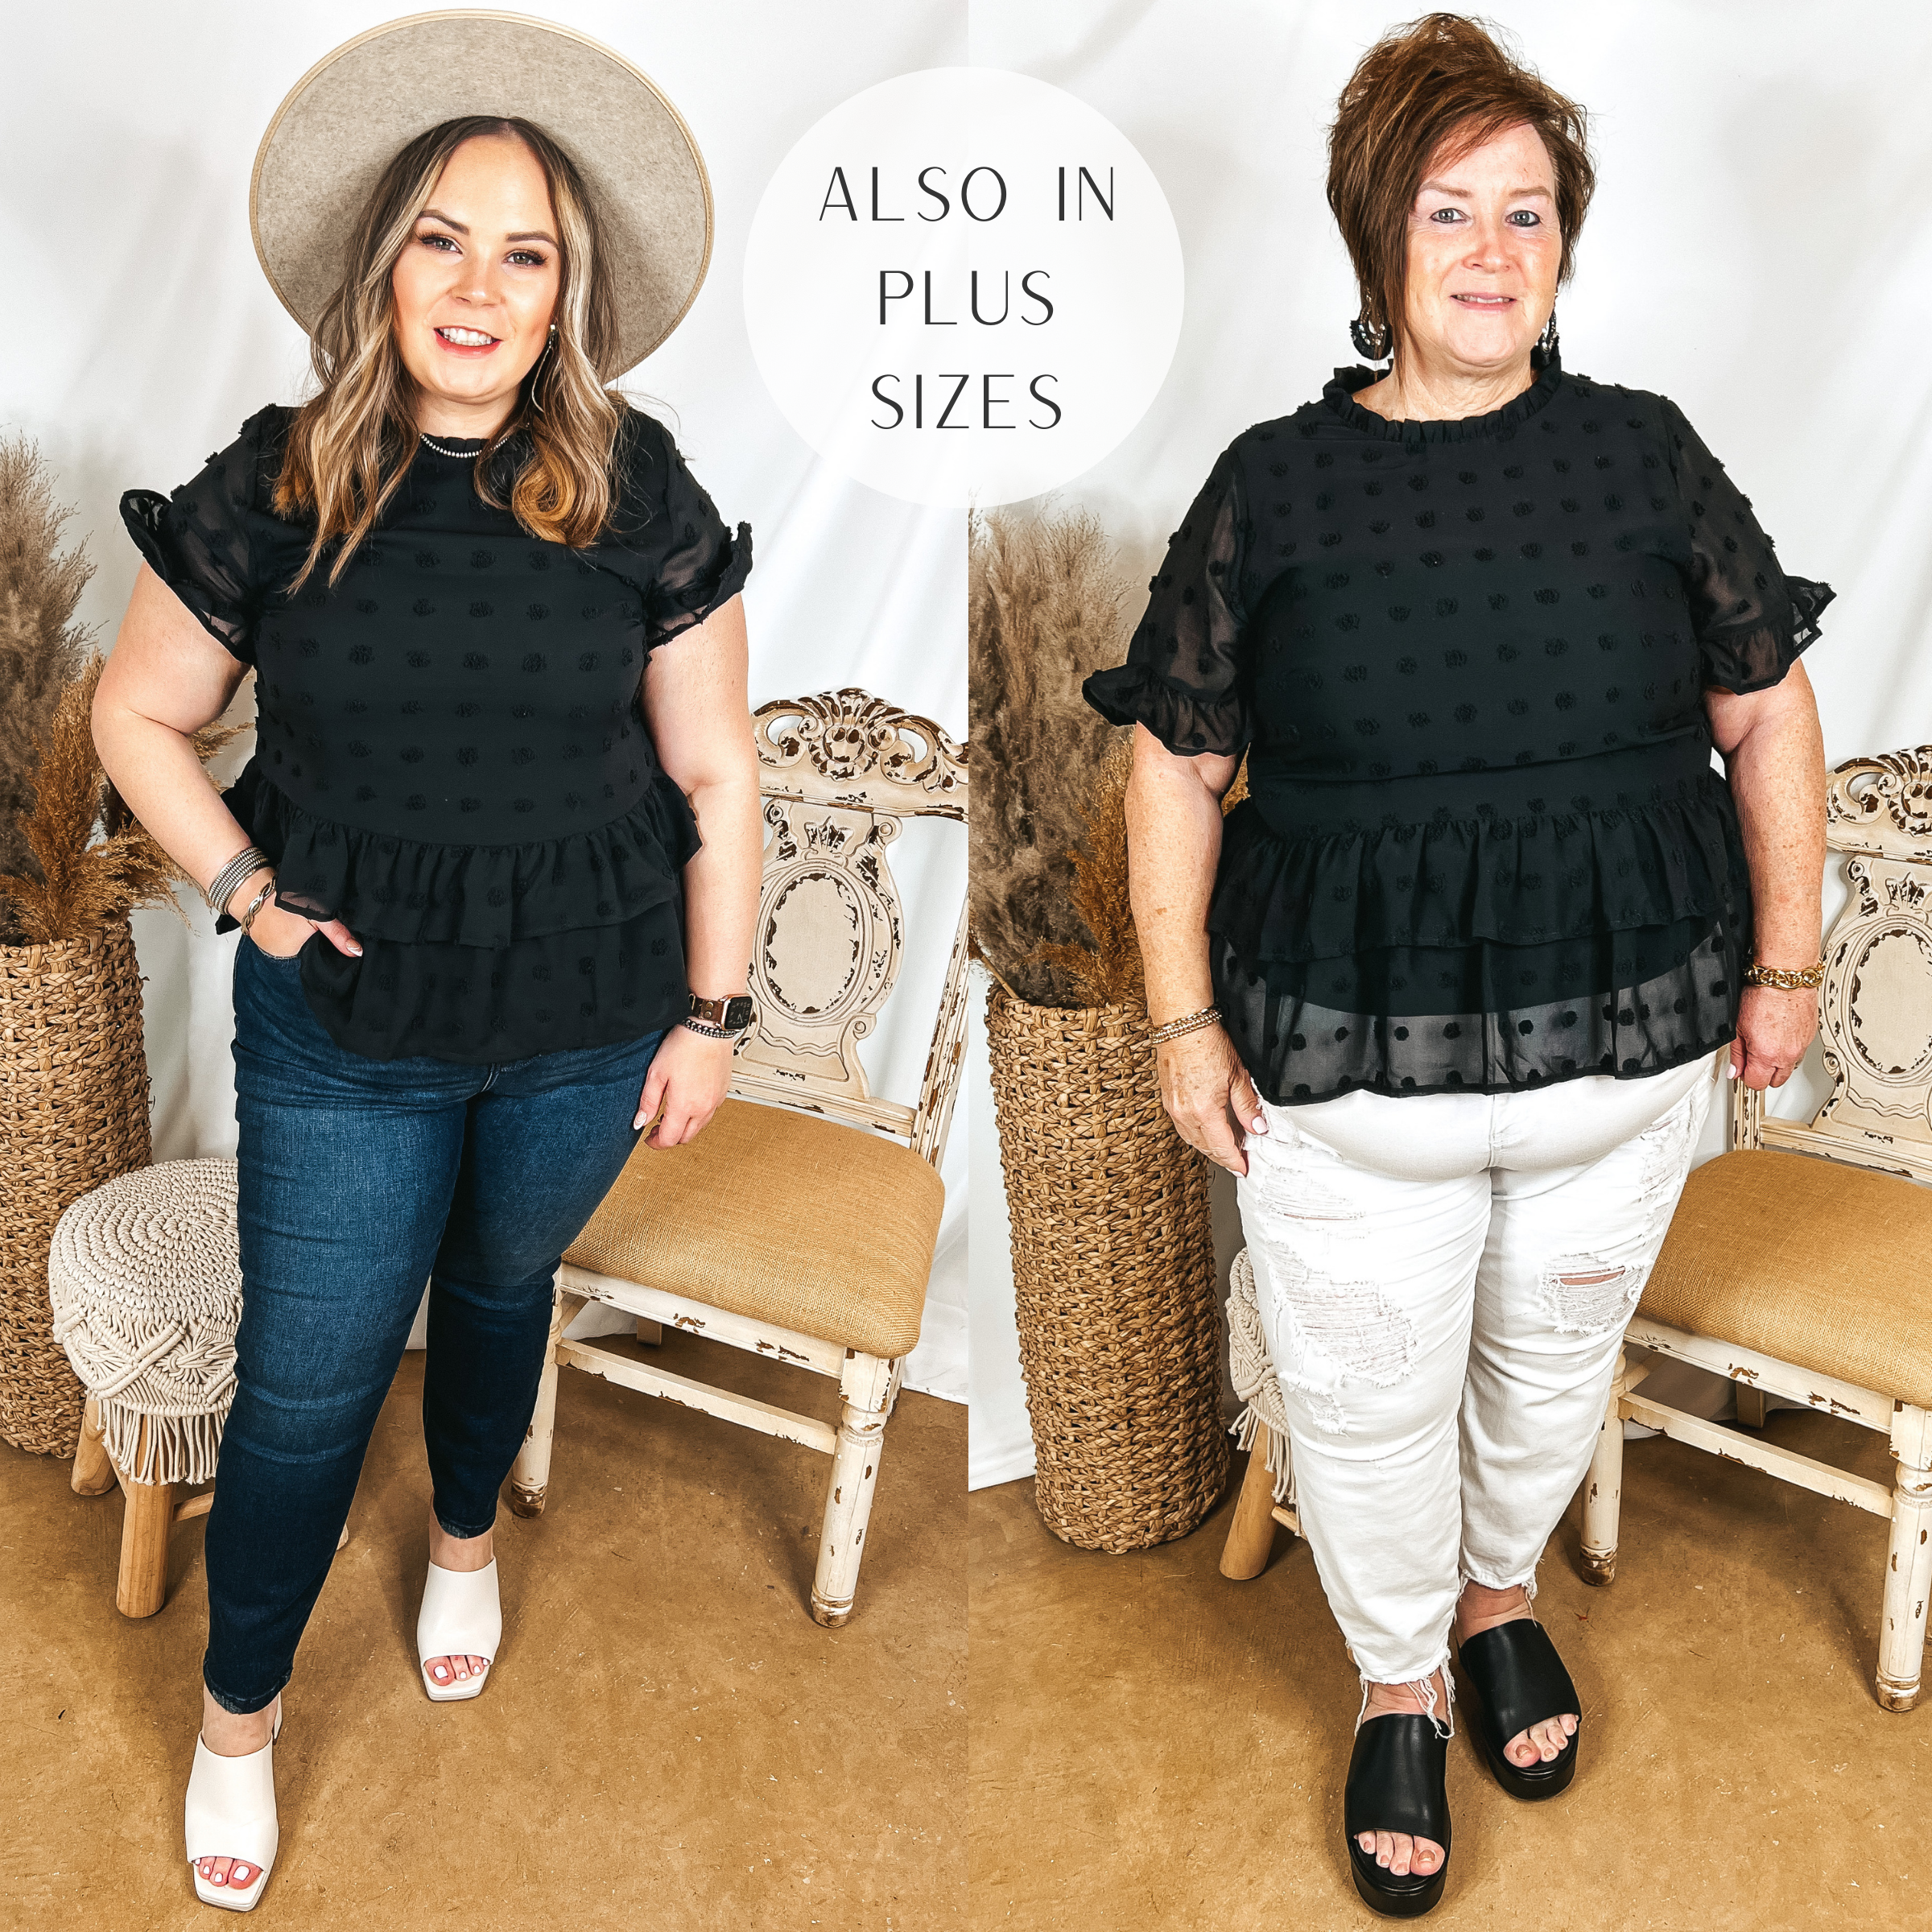 Models are wearing a black swiss dot peplum top. Size large model has it paired with dark wash jeans, white heels, and a speckled hat. Plus size model has it paired with white jeans, black sandals, and black jewelry.